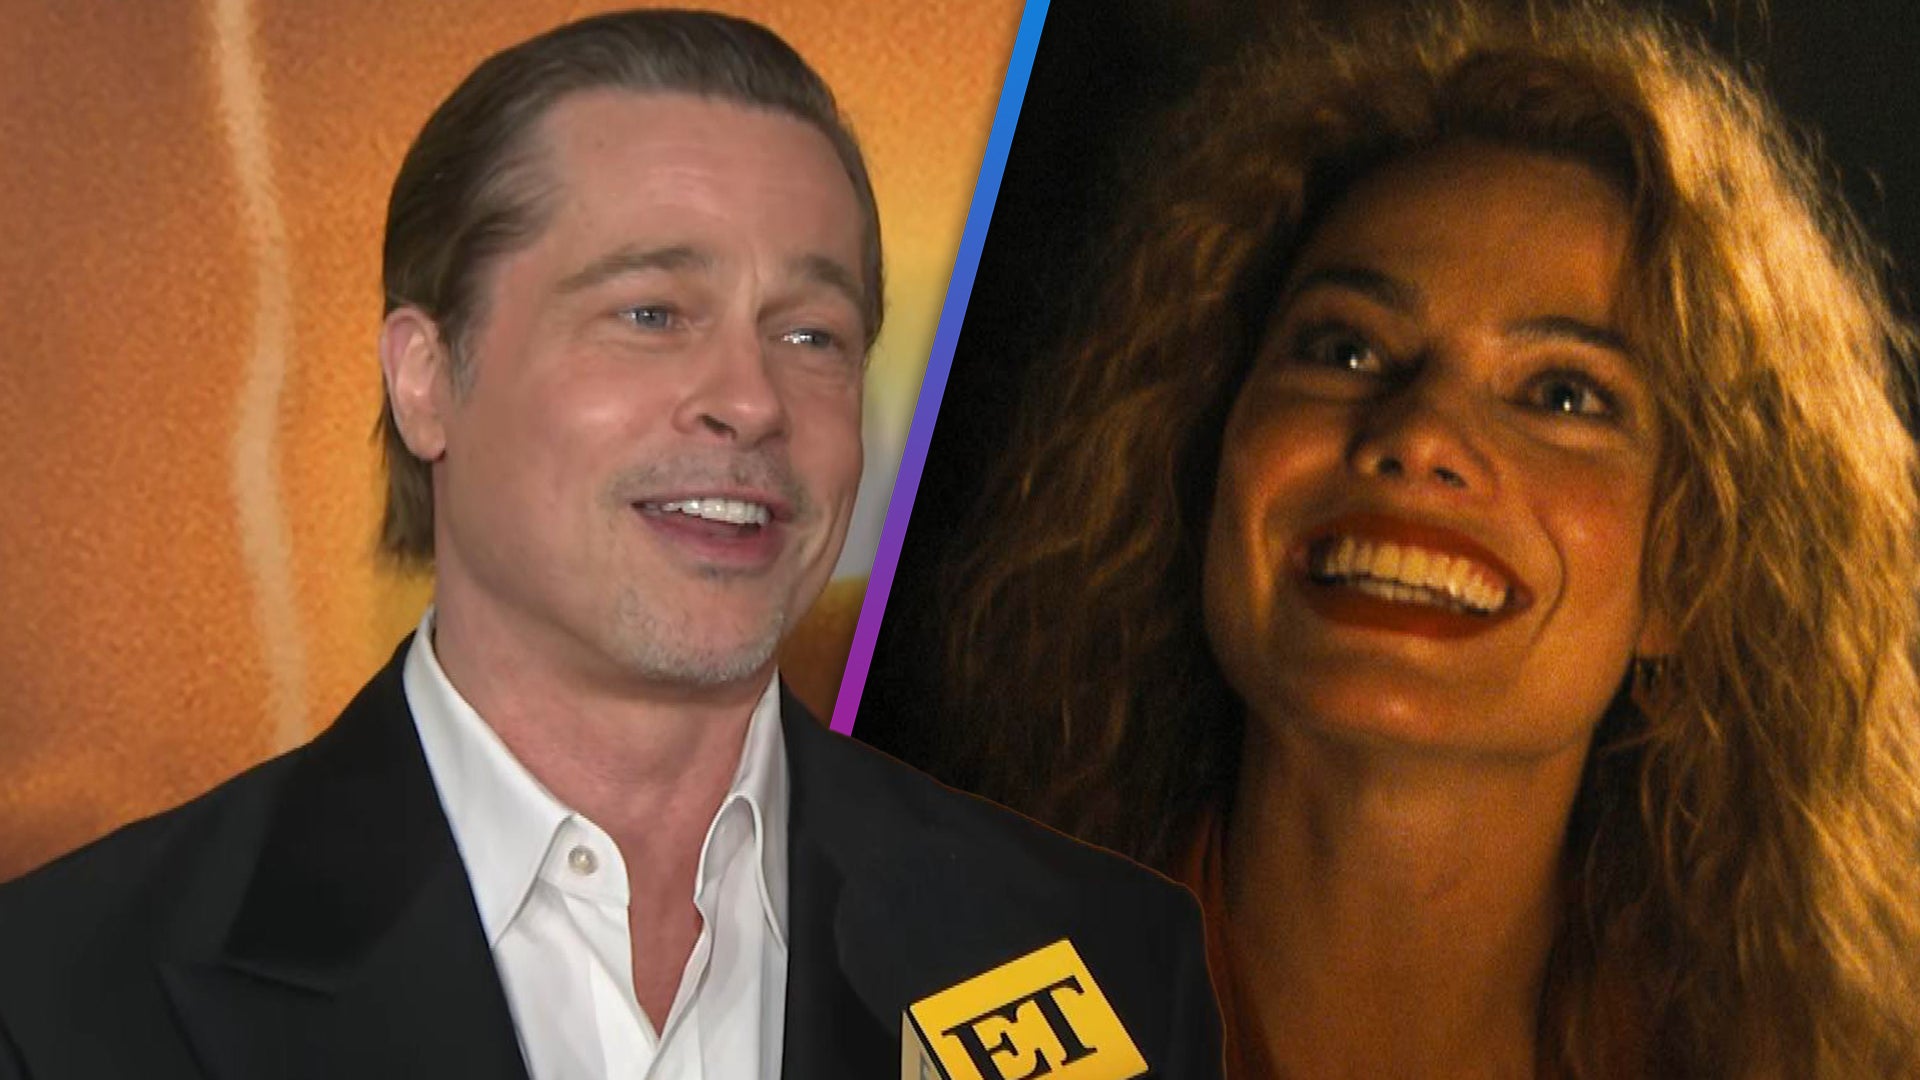 Brad Pitt Sets The Record Straight About 'Babylon' Kiss With Margot Robbie  (Exclusive) | Entertainment Tonight